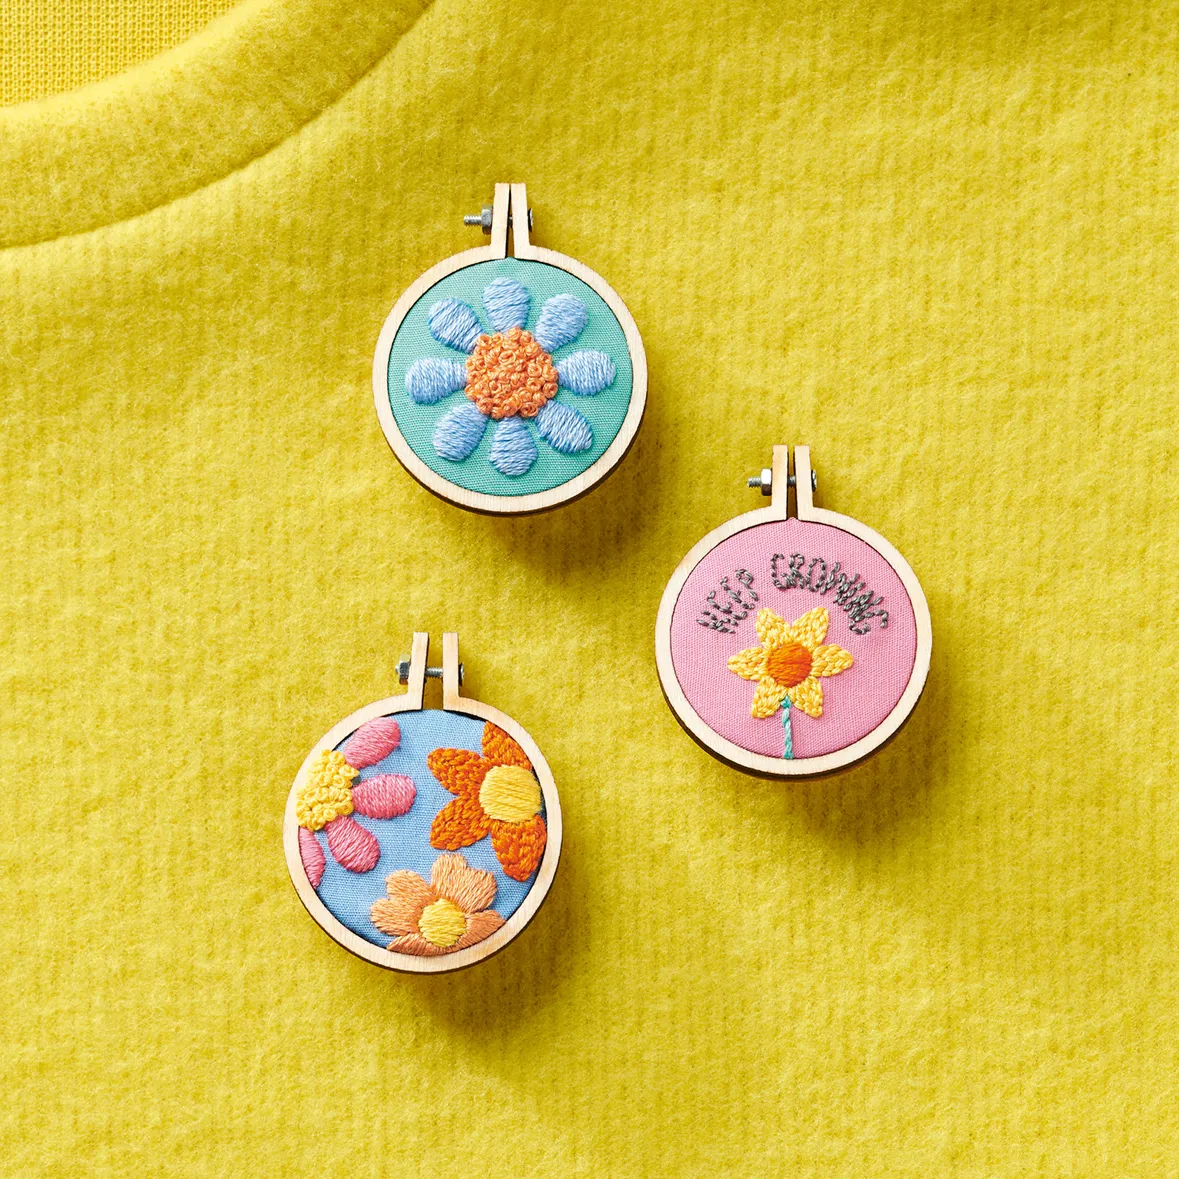 Mini Home Embroidered Hoop Necklaces - Free Patterns!